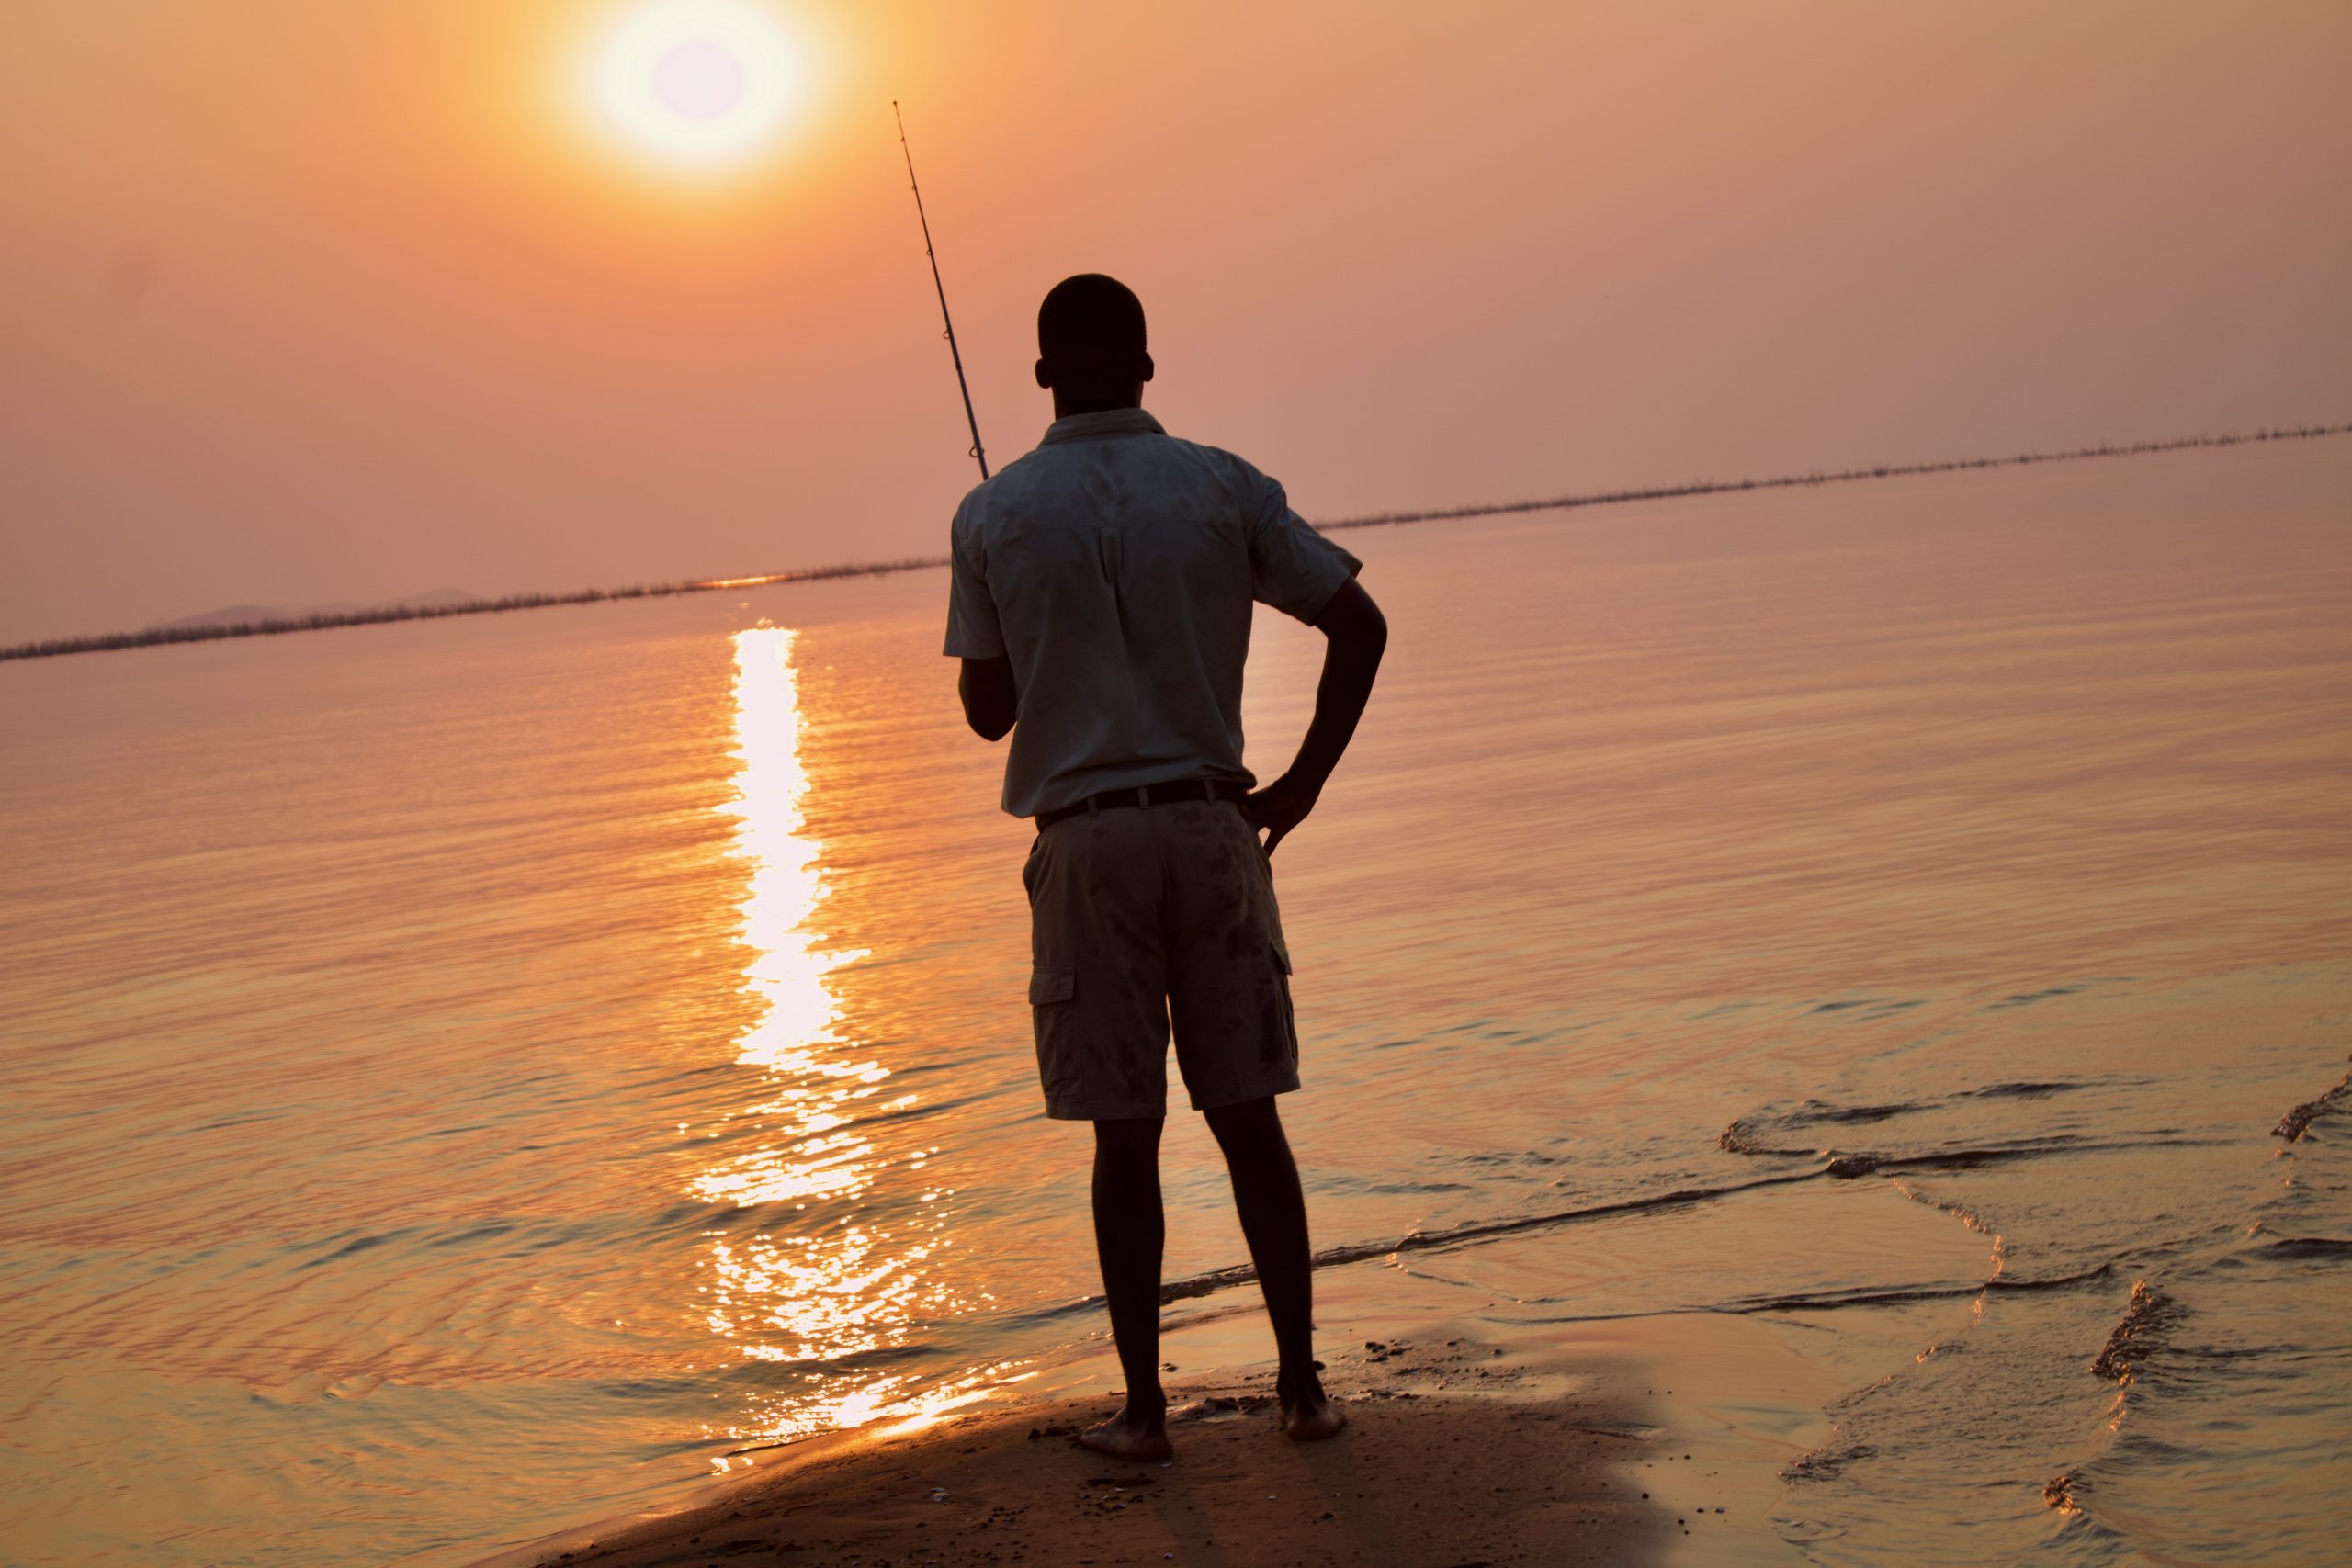 fishing is a popular leisure activity in zimbabwe